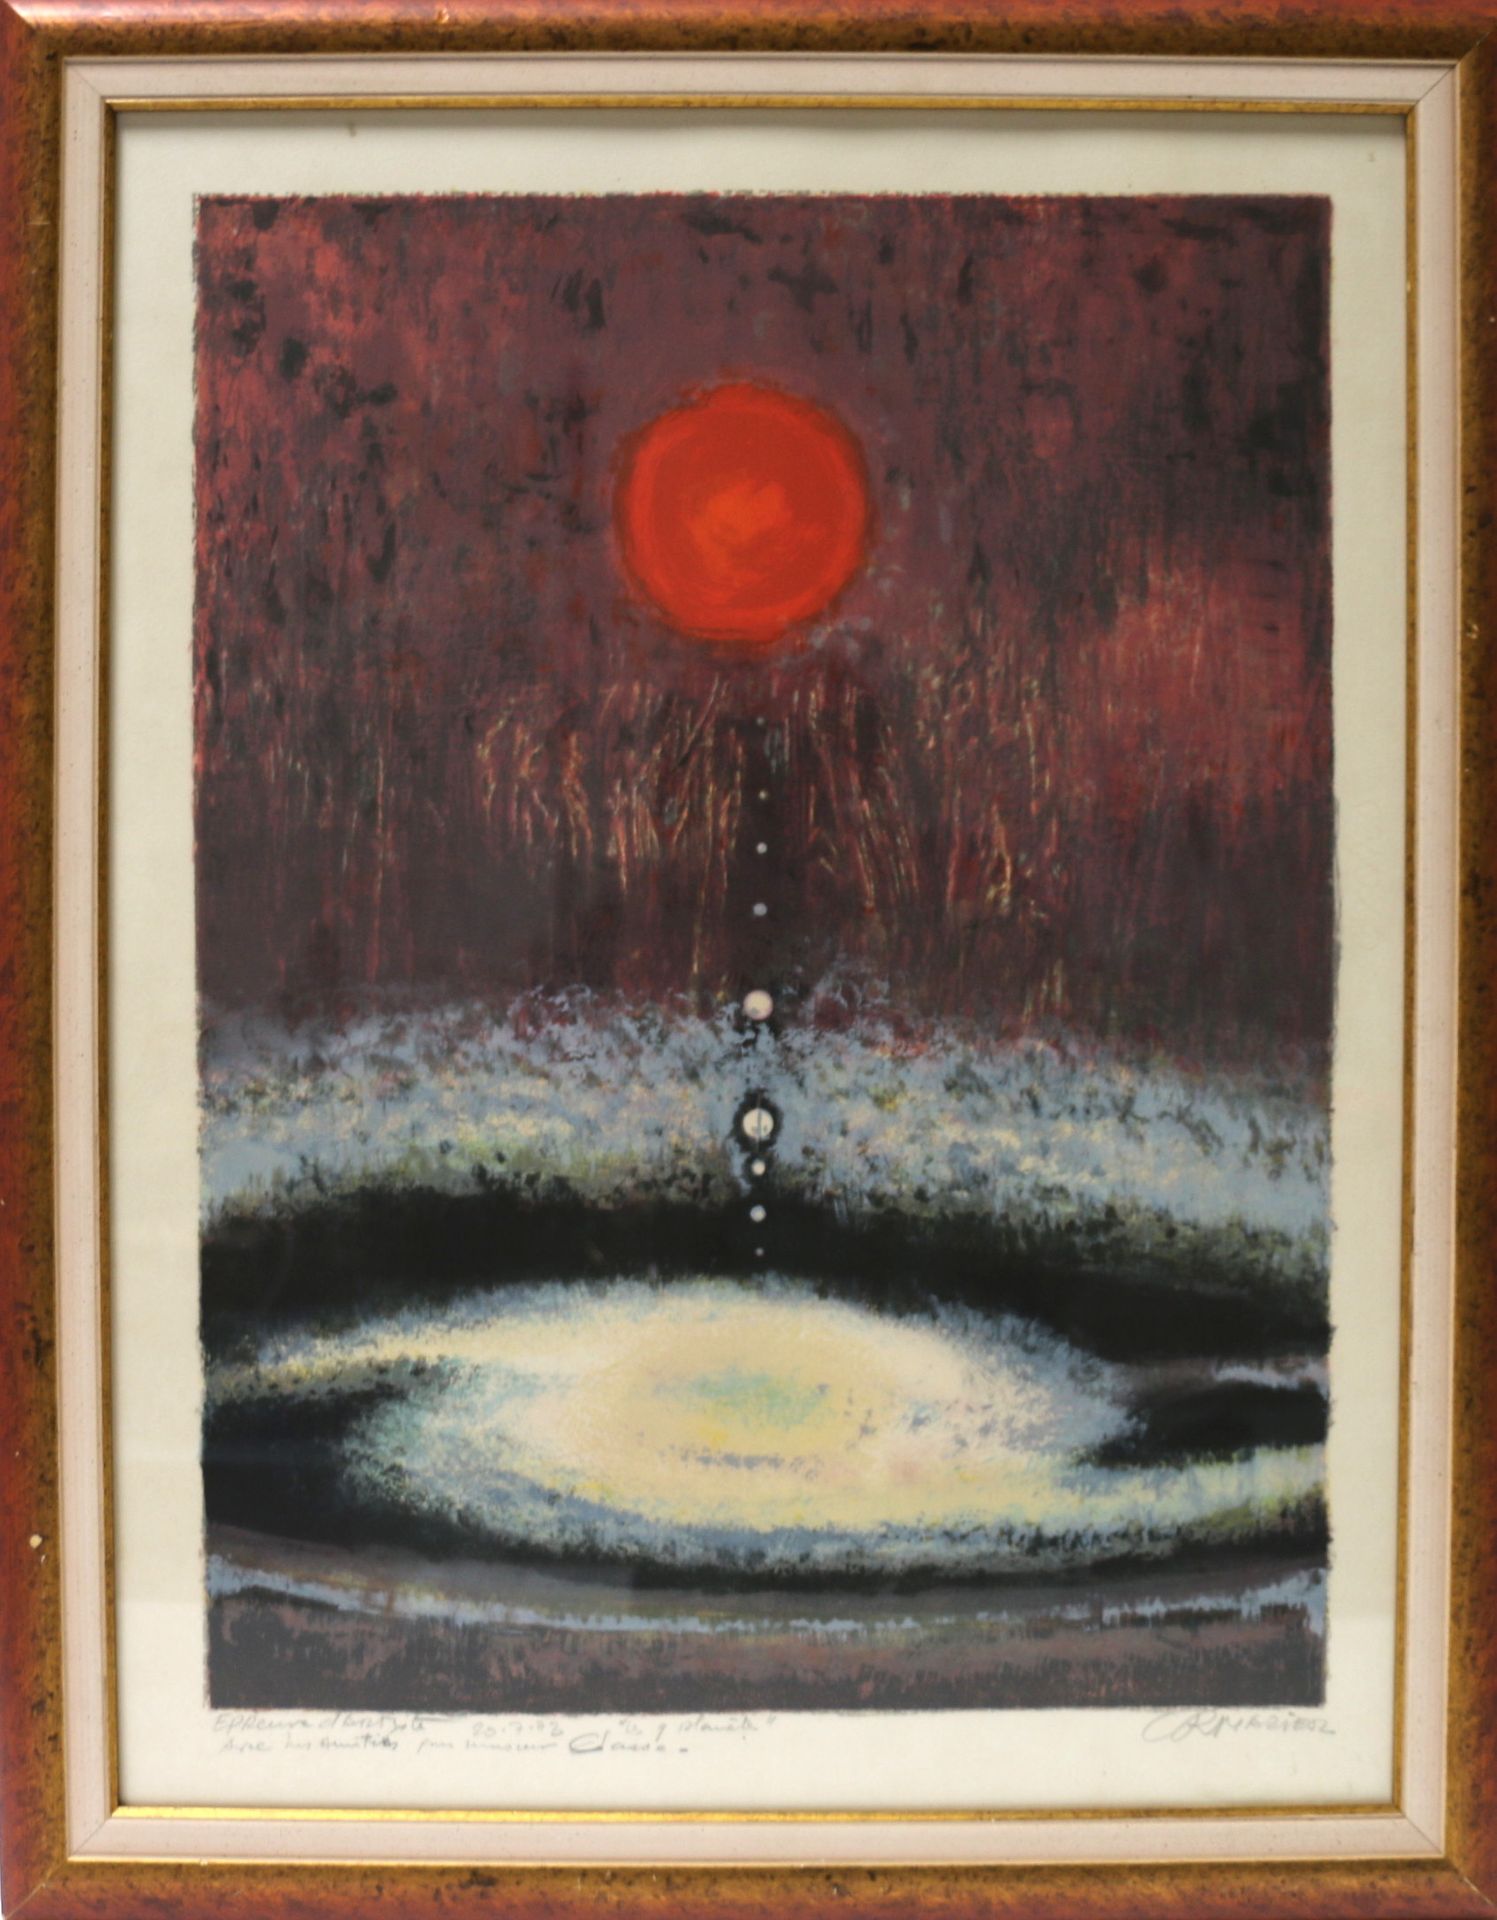 Null "The 9 planets" Litho EA dated 20/7/73; Signed illegible 79 x 59 cm